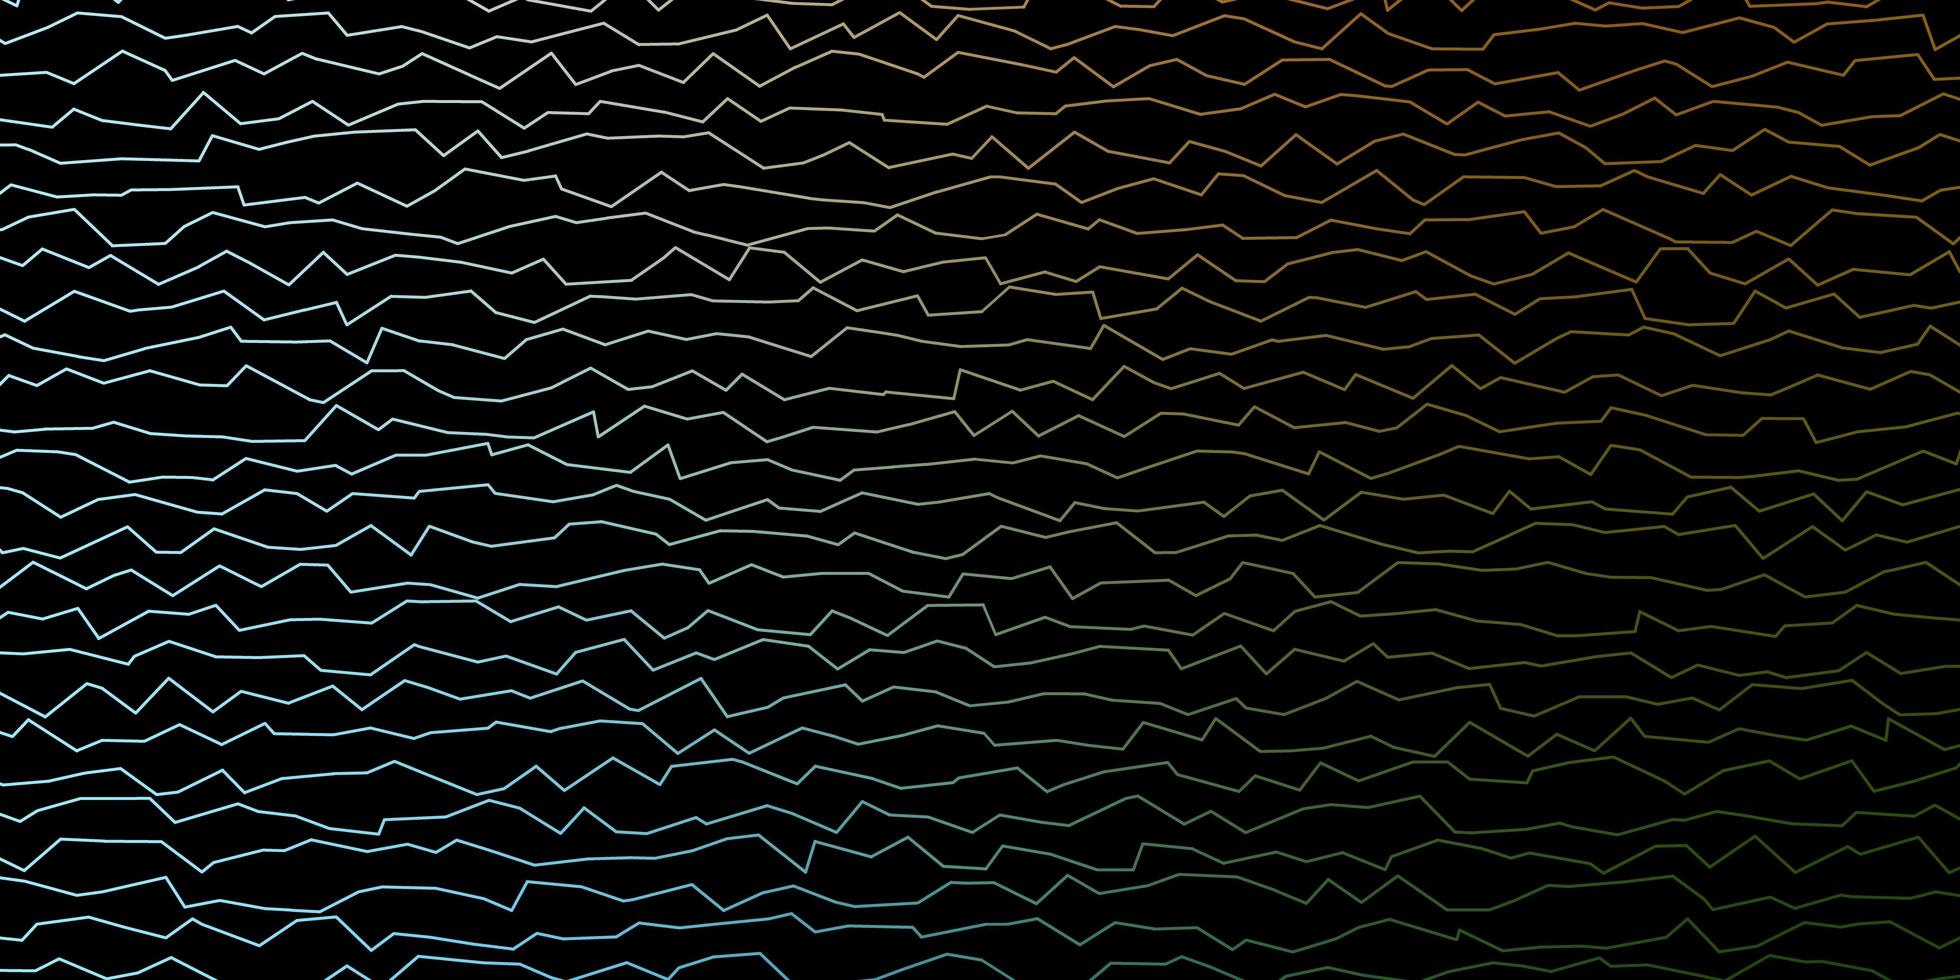 Dark Blue, Green vector pattern with curved lines.